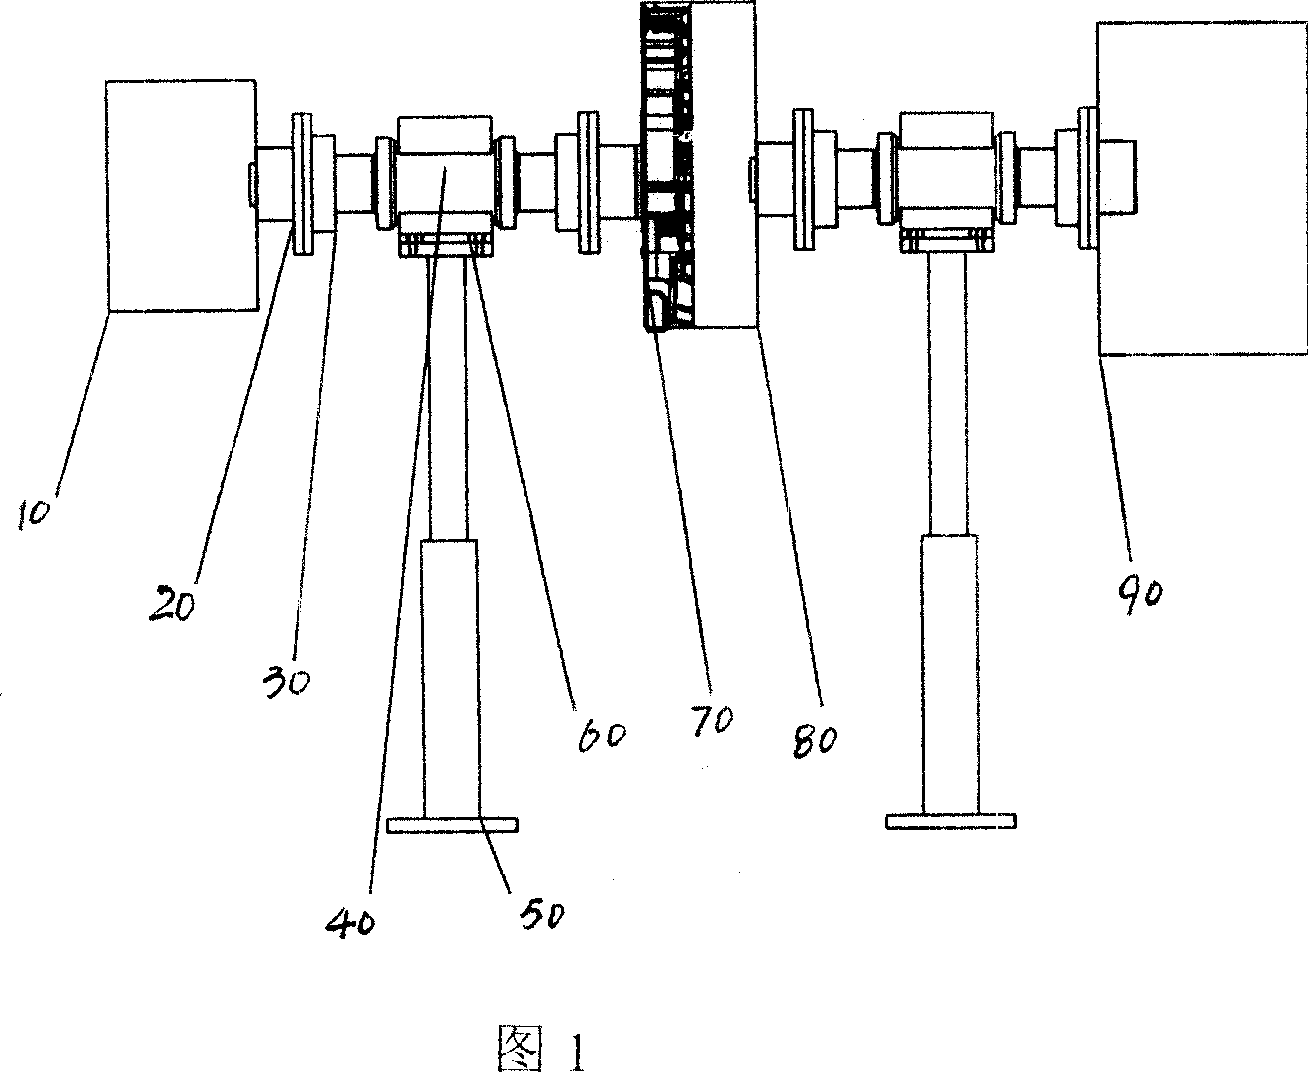 Bench test device for power assembly of mixed power electric vehicle